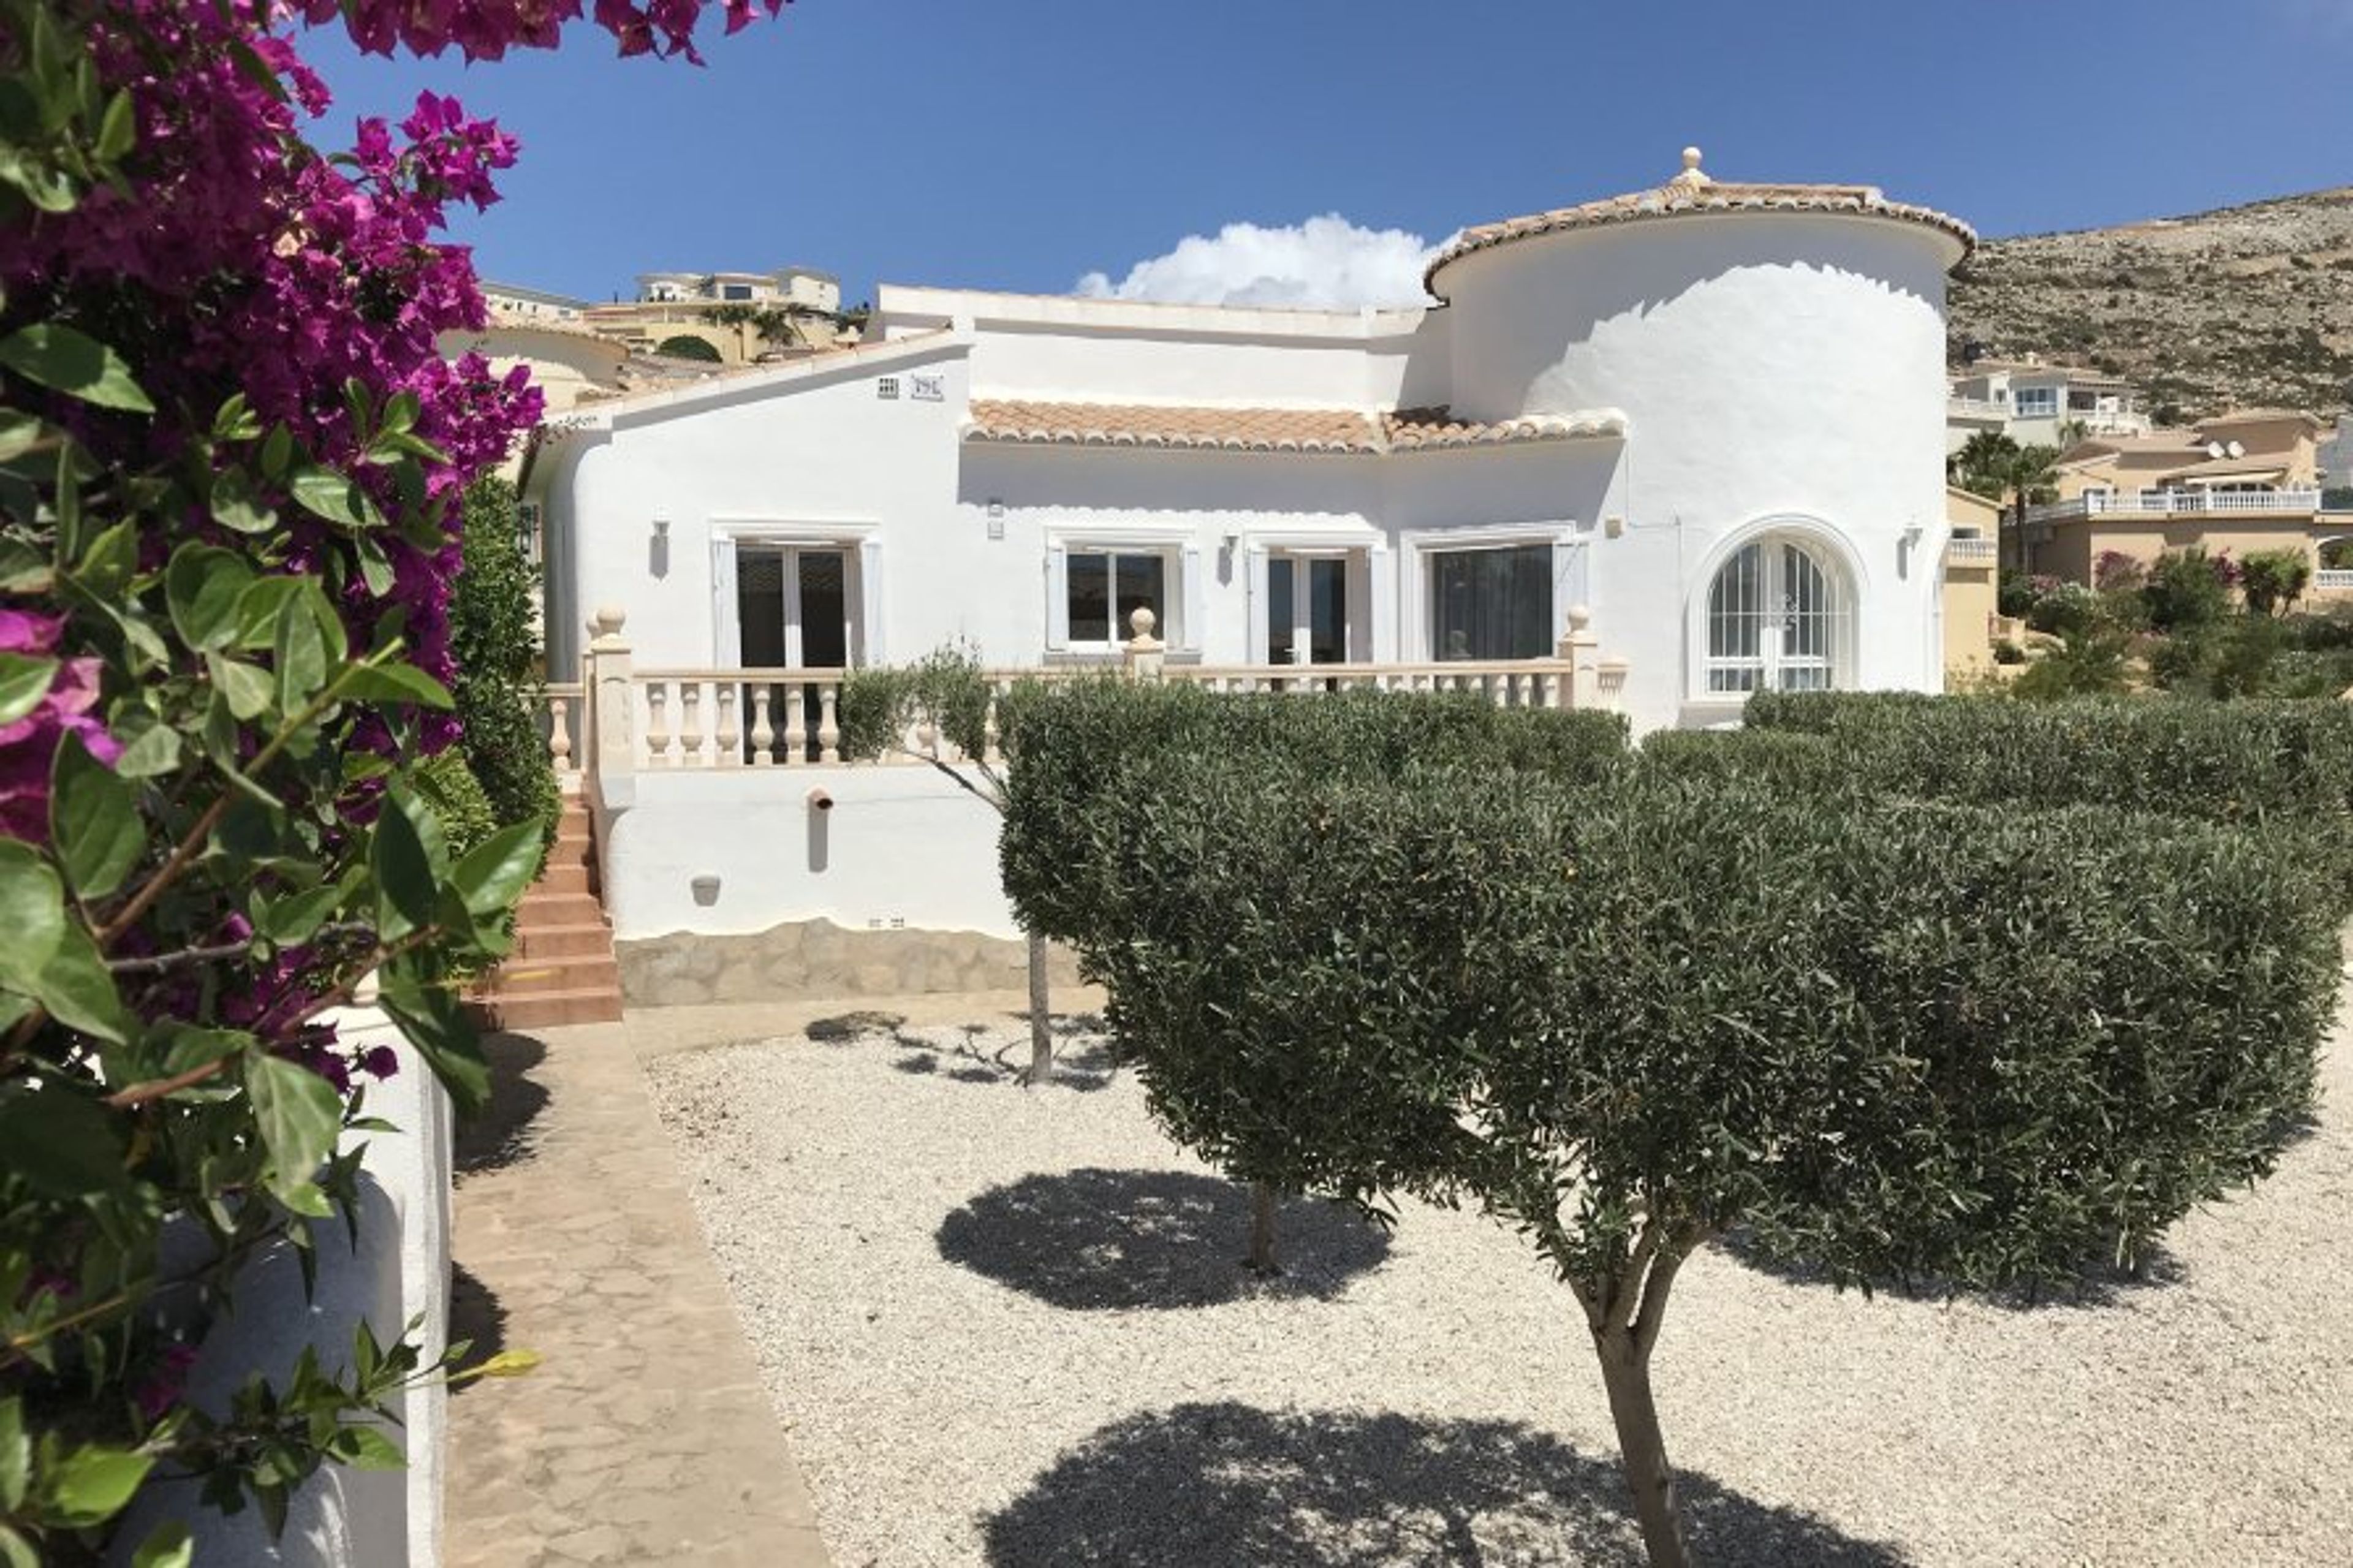 Olive trees and bougainvillea at the front of the villa